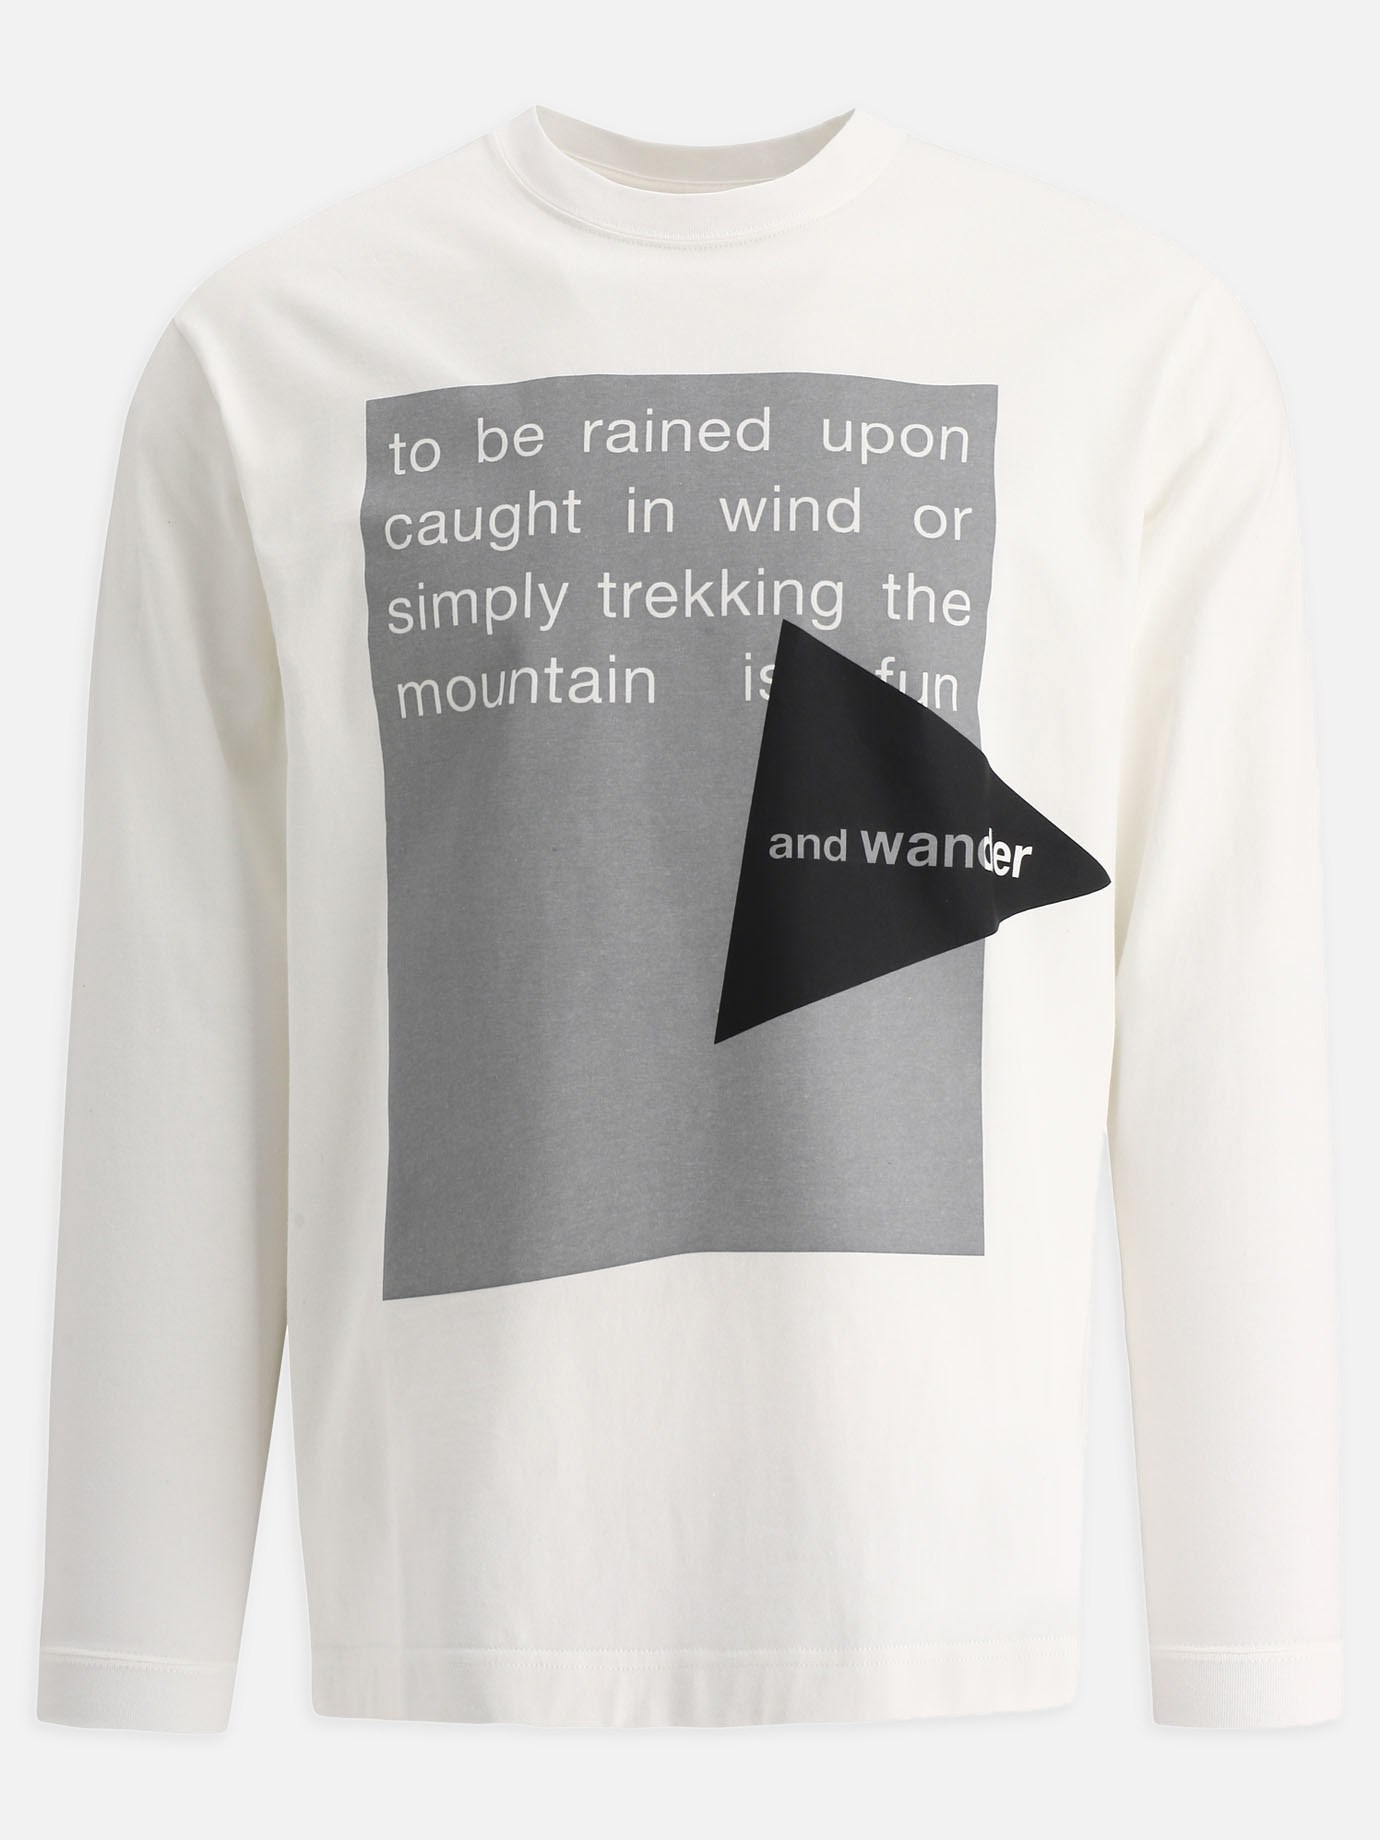  Reflective  t-shirtby and Wander - 3